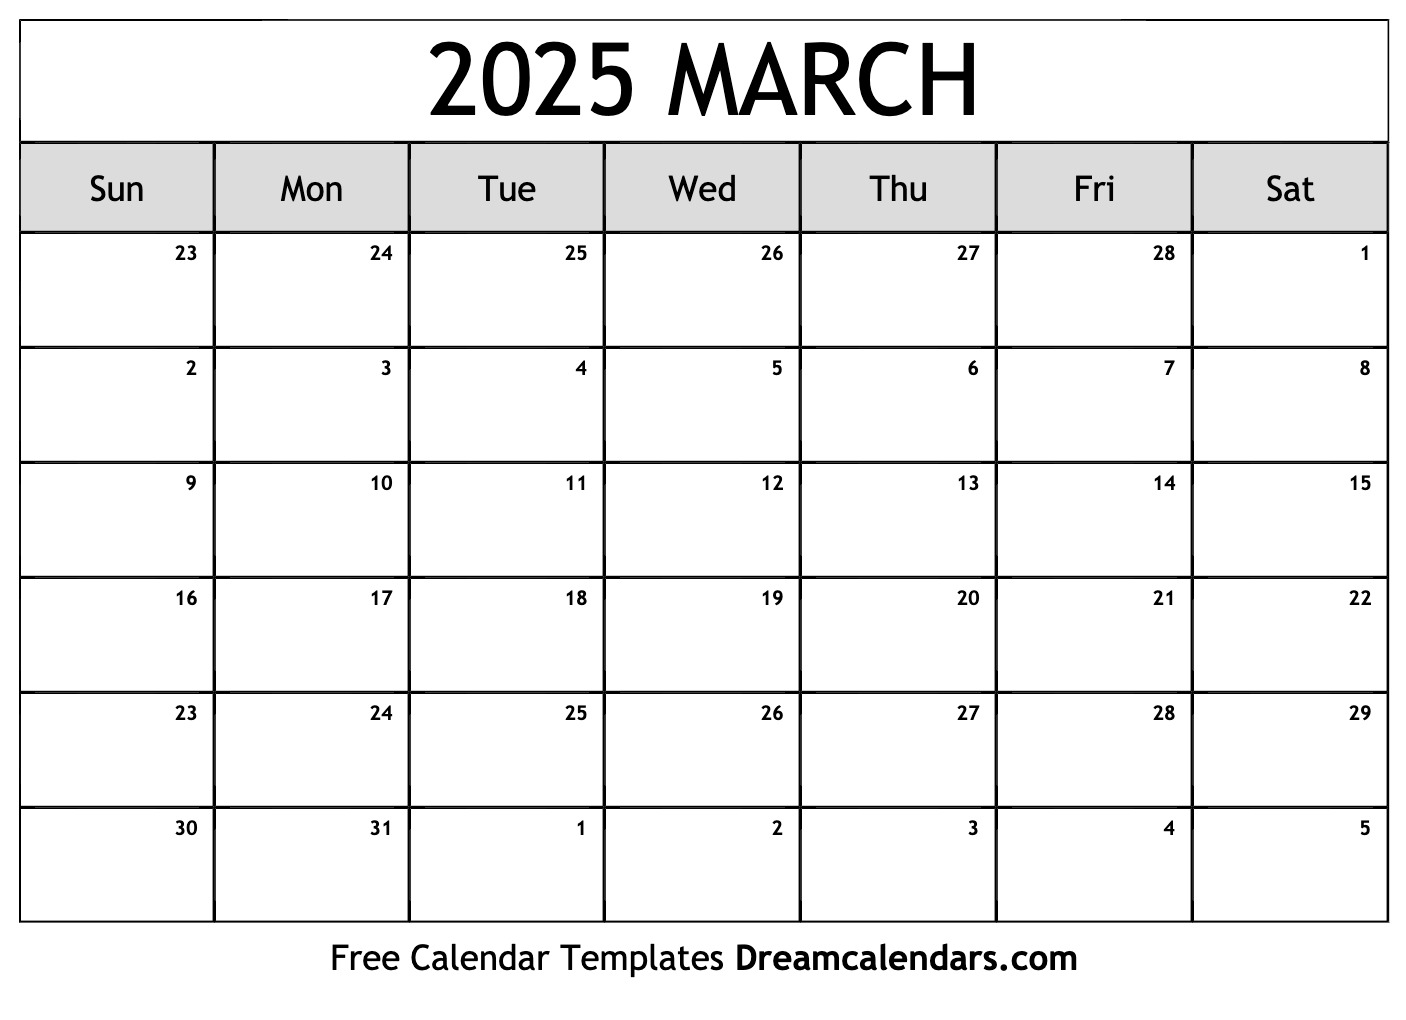 March 2025 Calendar Free Printable with Holidays and Observances